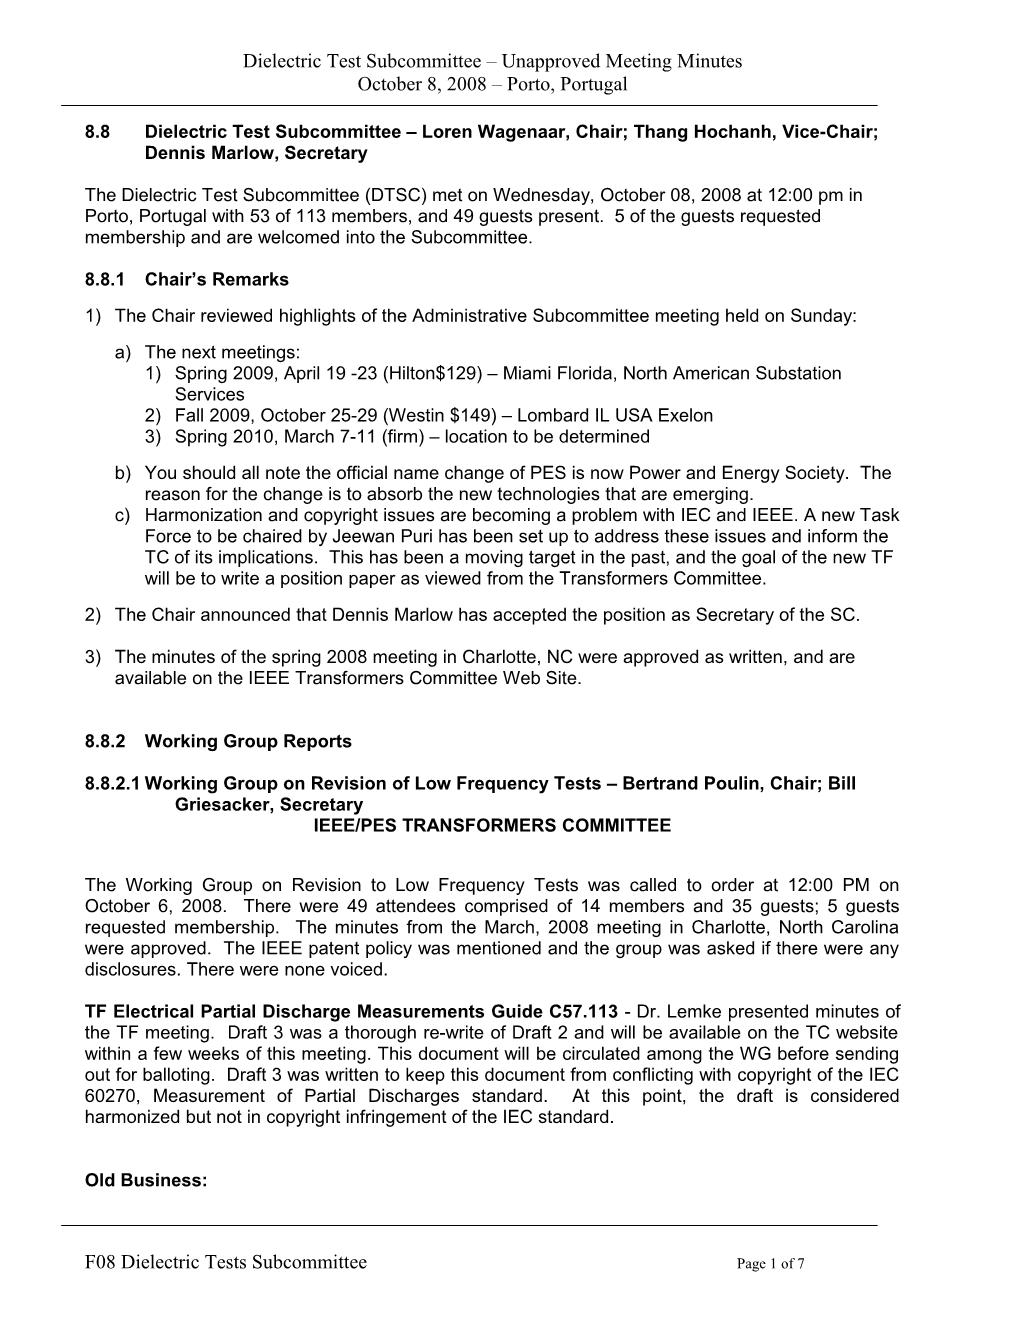 Fall 2008 Dielectric Test Subcommittee Minutes